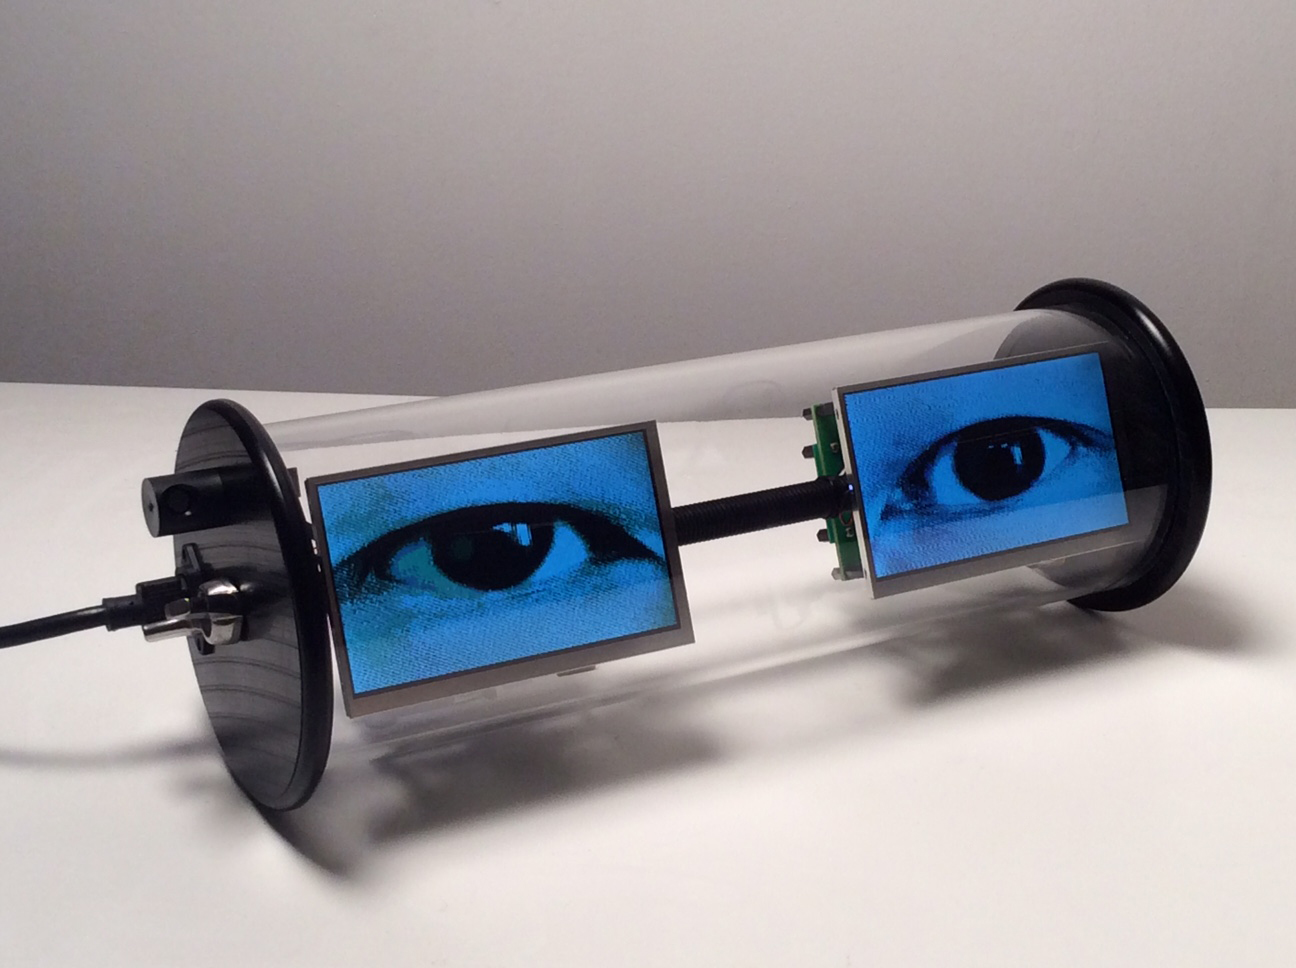 A digital art installation with two videos of eyes on blue screens encapsulated in a glass tube.